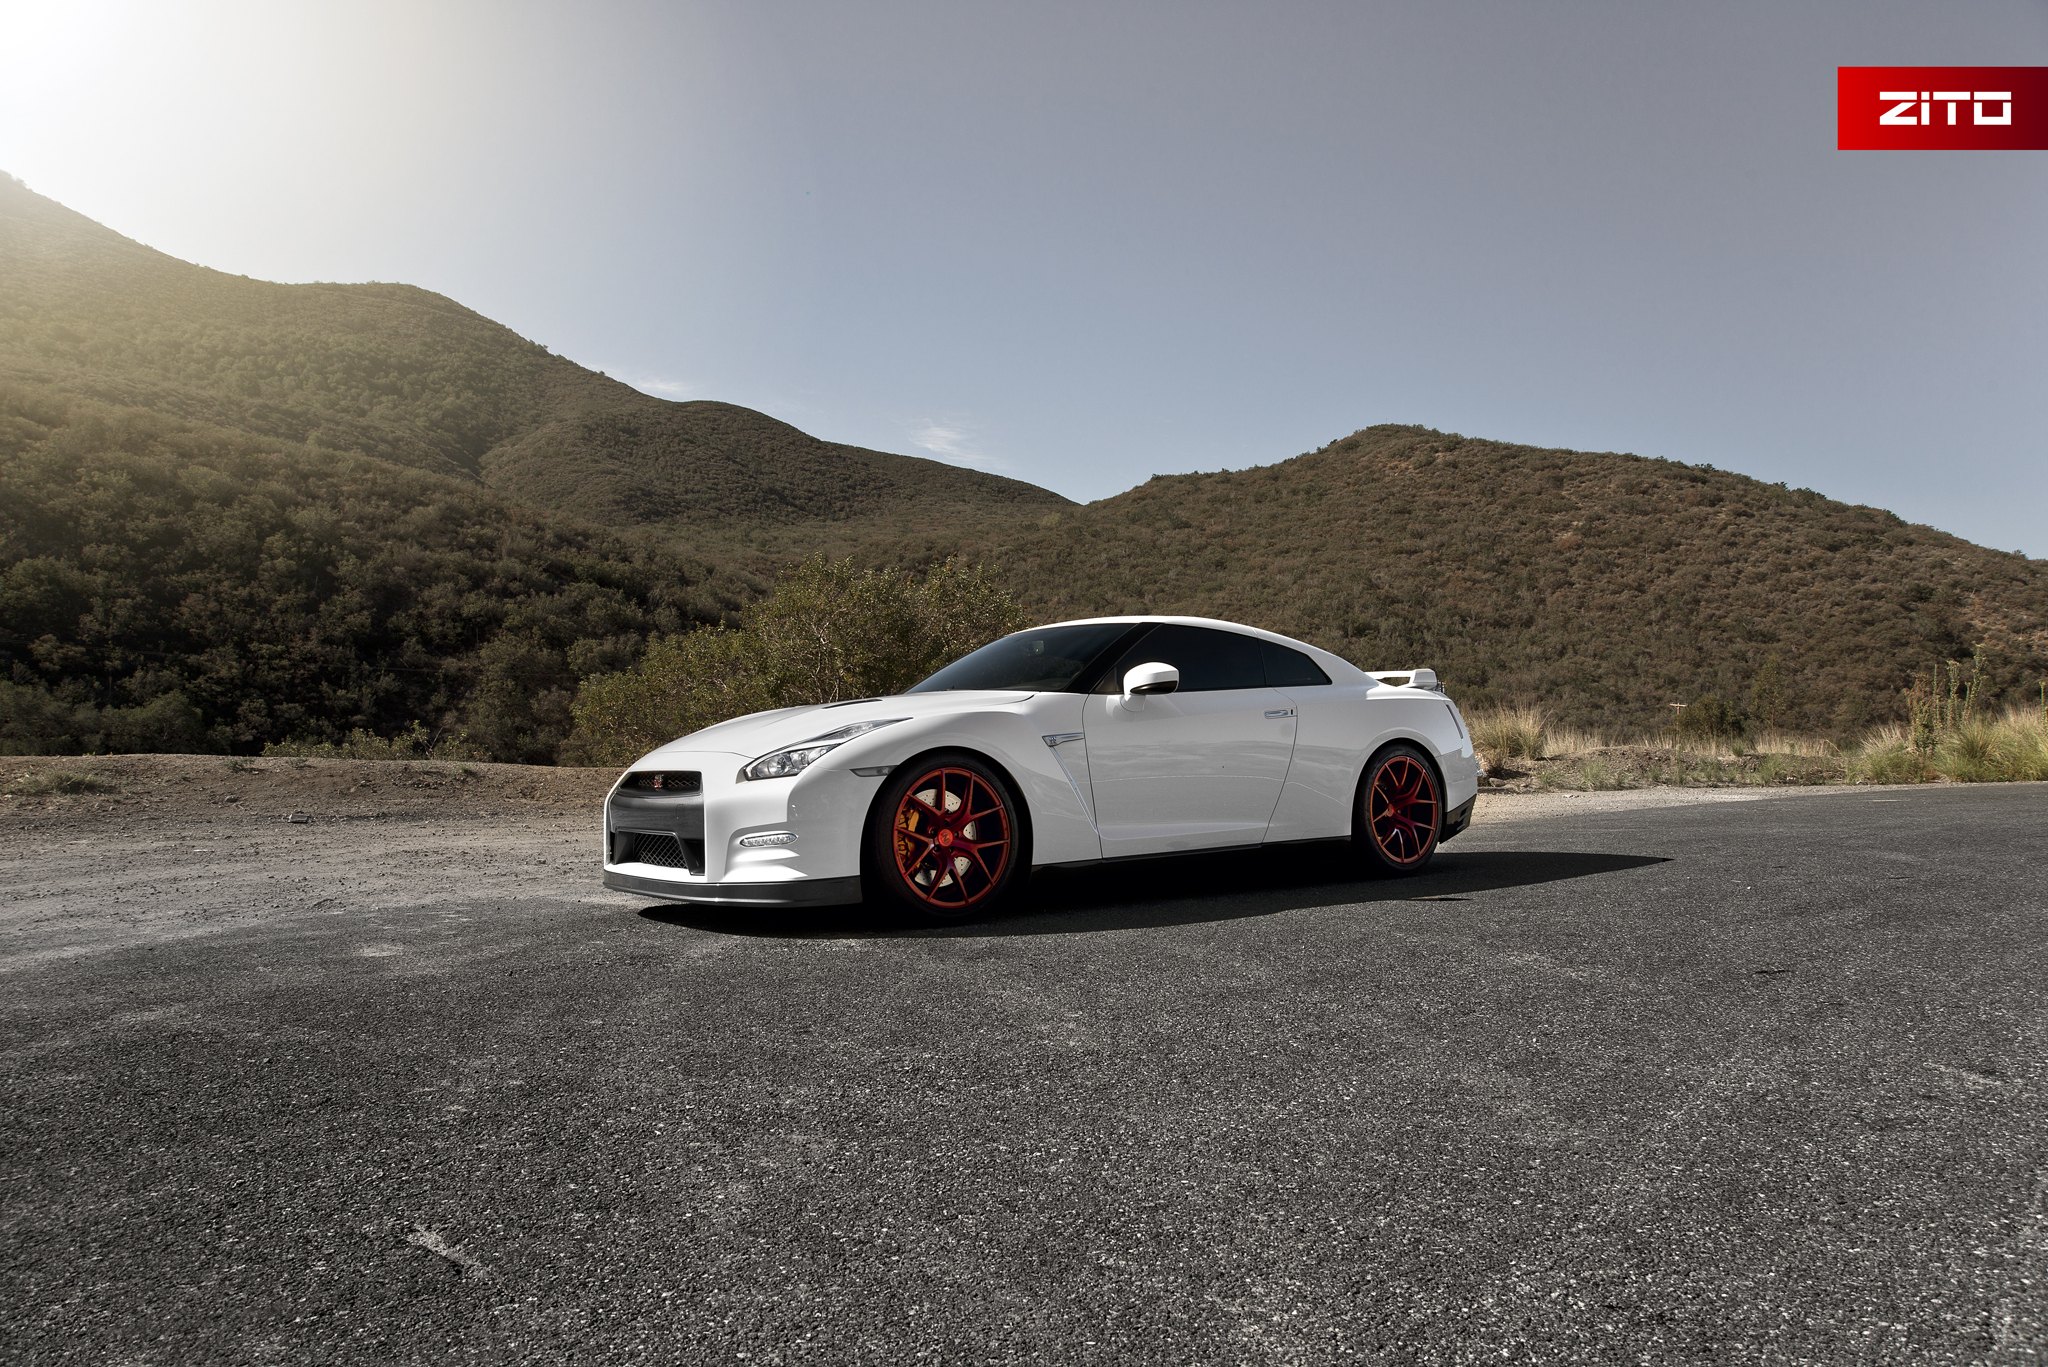 Crystal Clear Halo Headlights on White Nissan GT-R - Photo by Zito Wheels